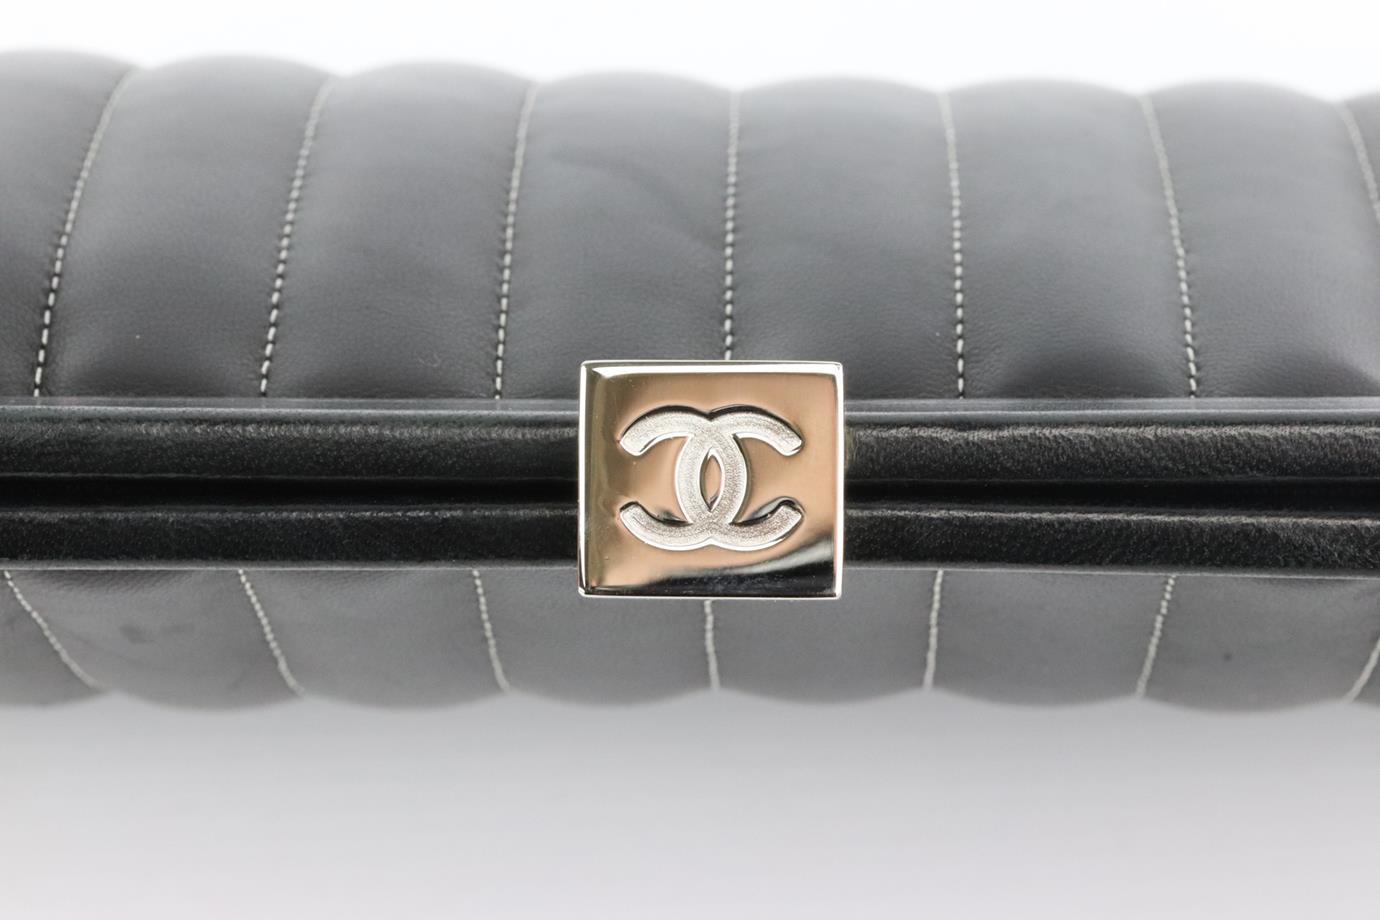 Made in France, this beautiful 2006 Chanel ‘Mademoiselle Ligne' clutch bag has been made from black lambskin leather exterior, this piece is decorated with Chanel's silver-tone CC logo clasp on the top and finished with white contrast stitching to